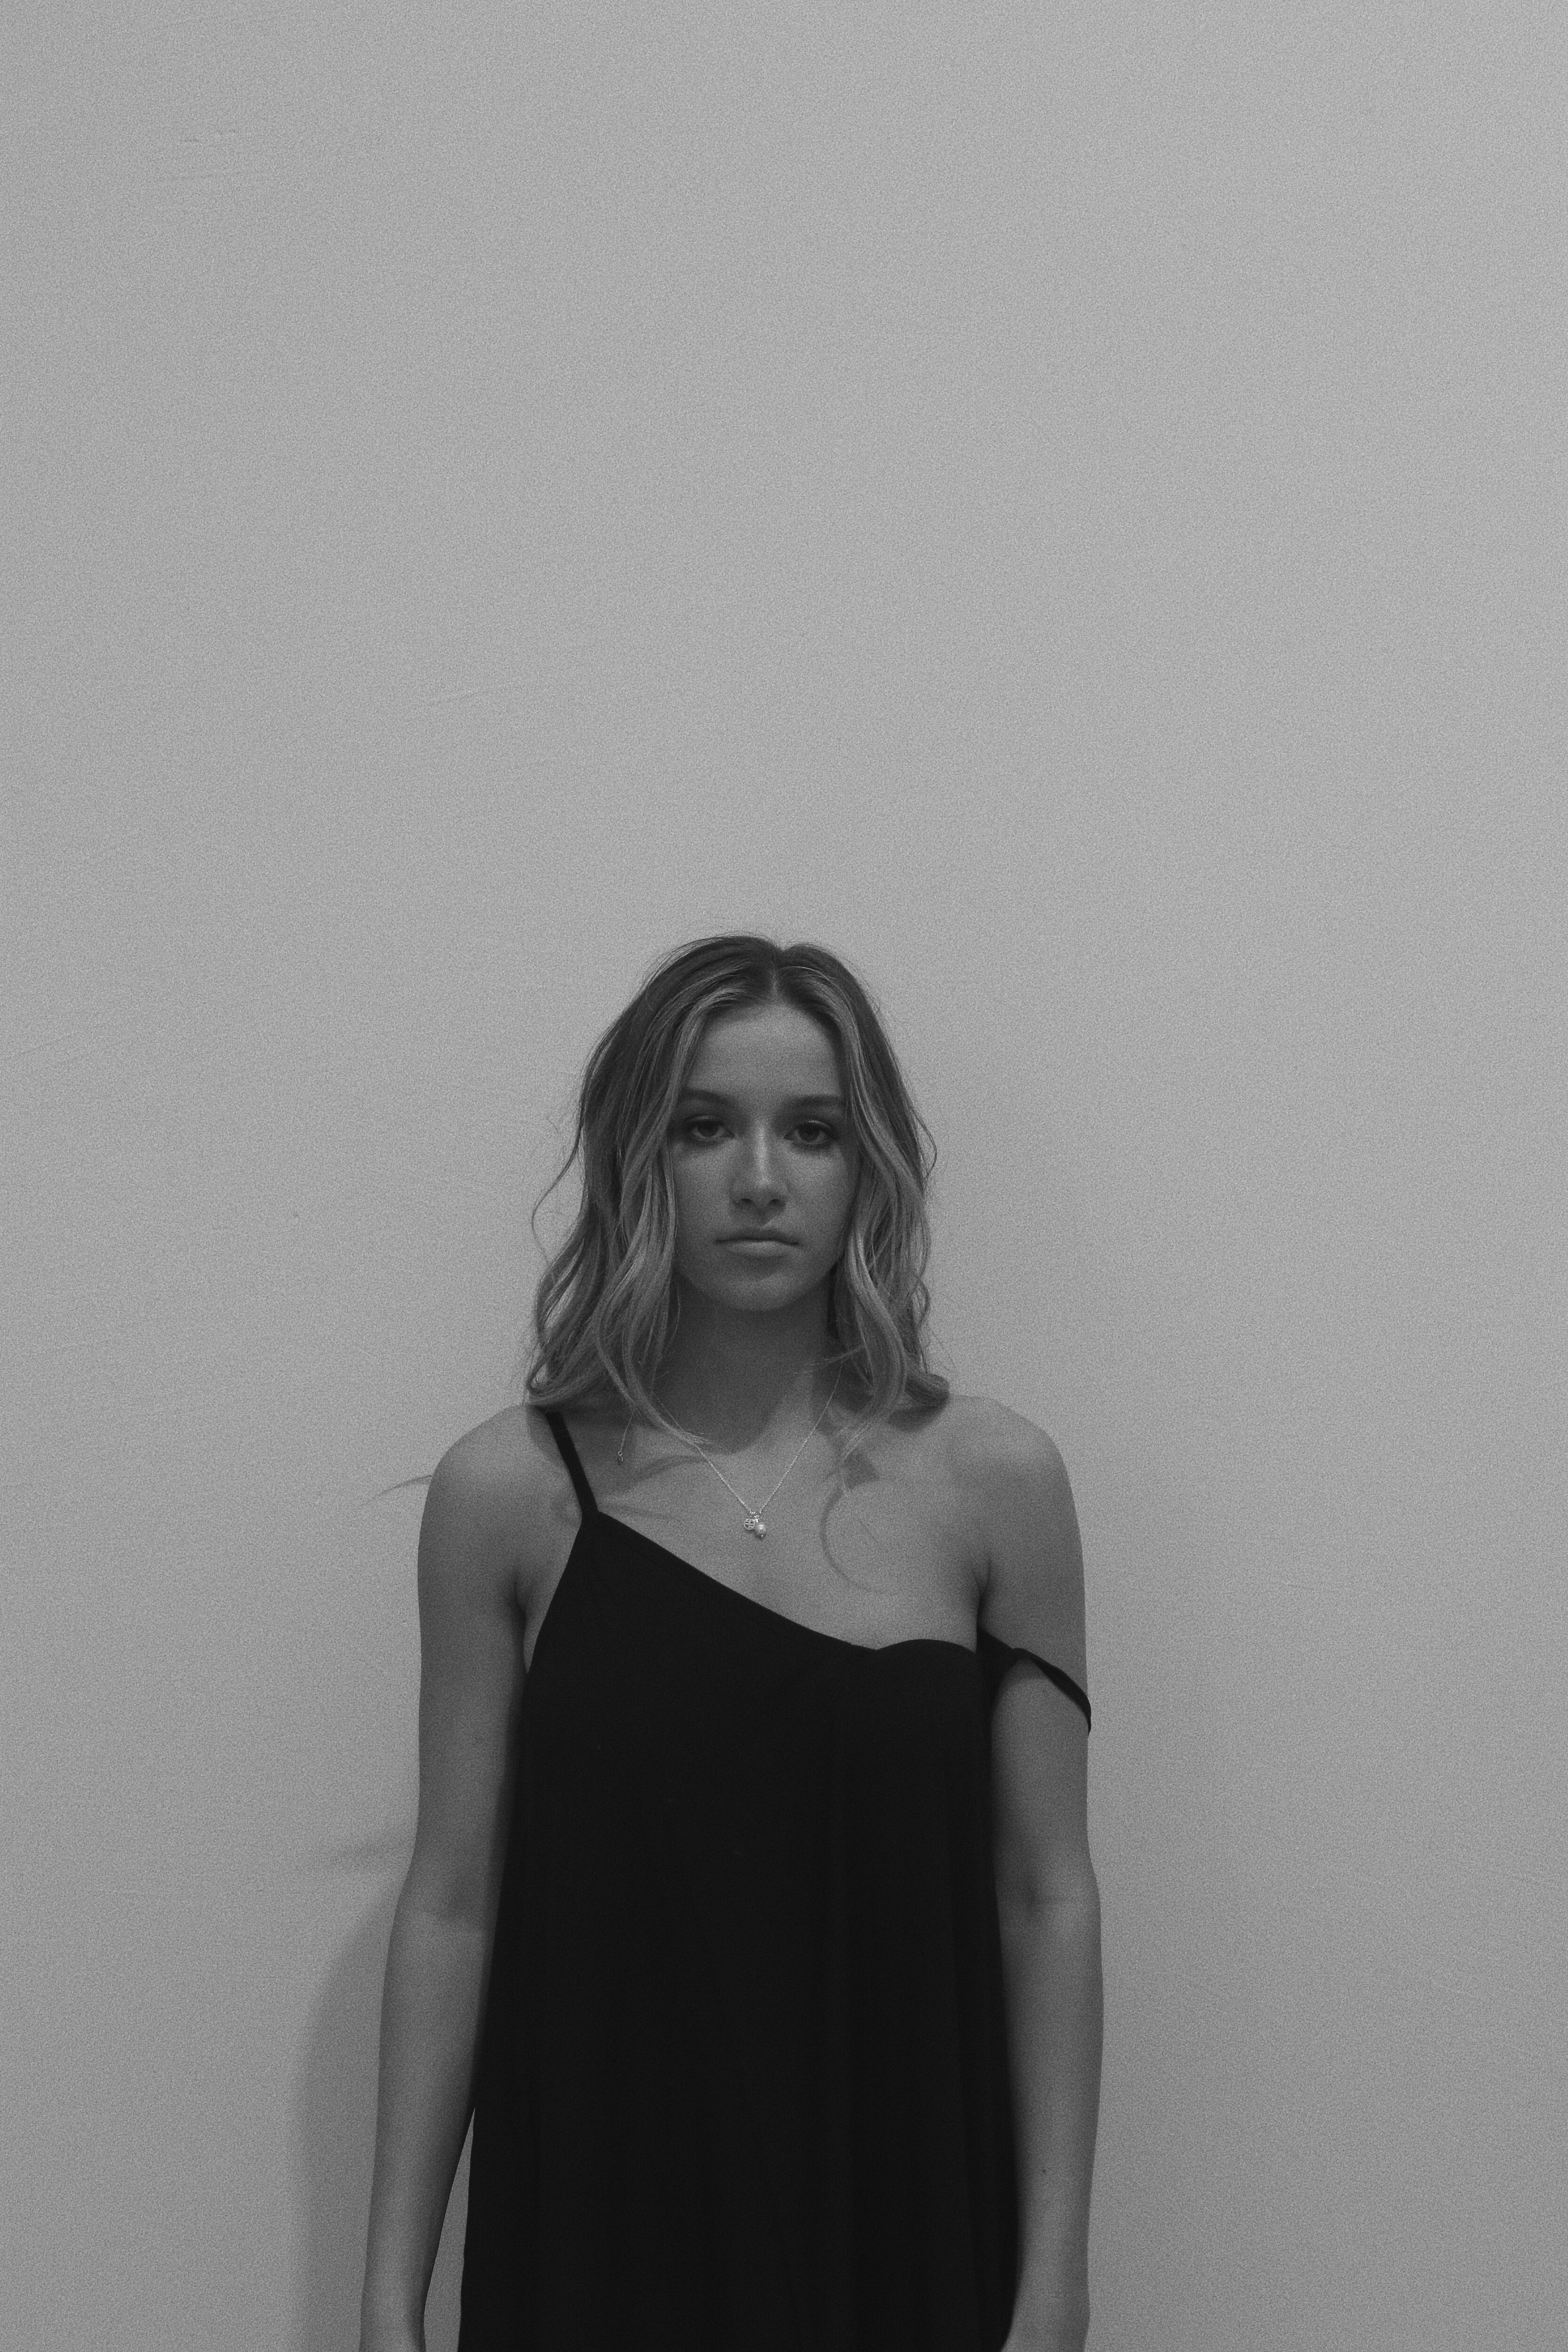 A grayscale image capturing a young woman in a black dress, standing against a plain background, her expression pensive.